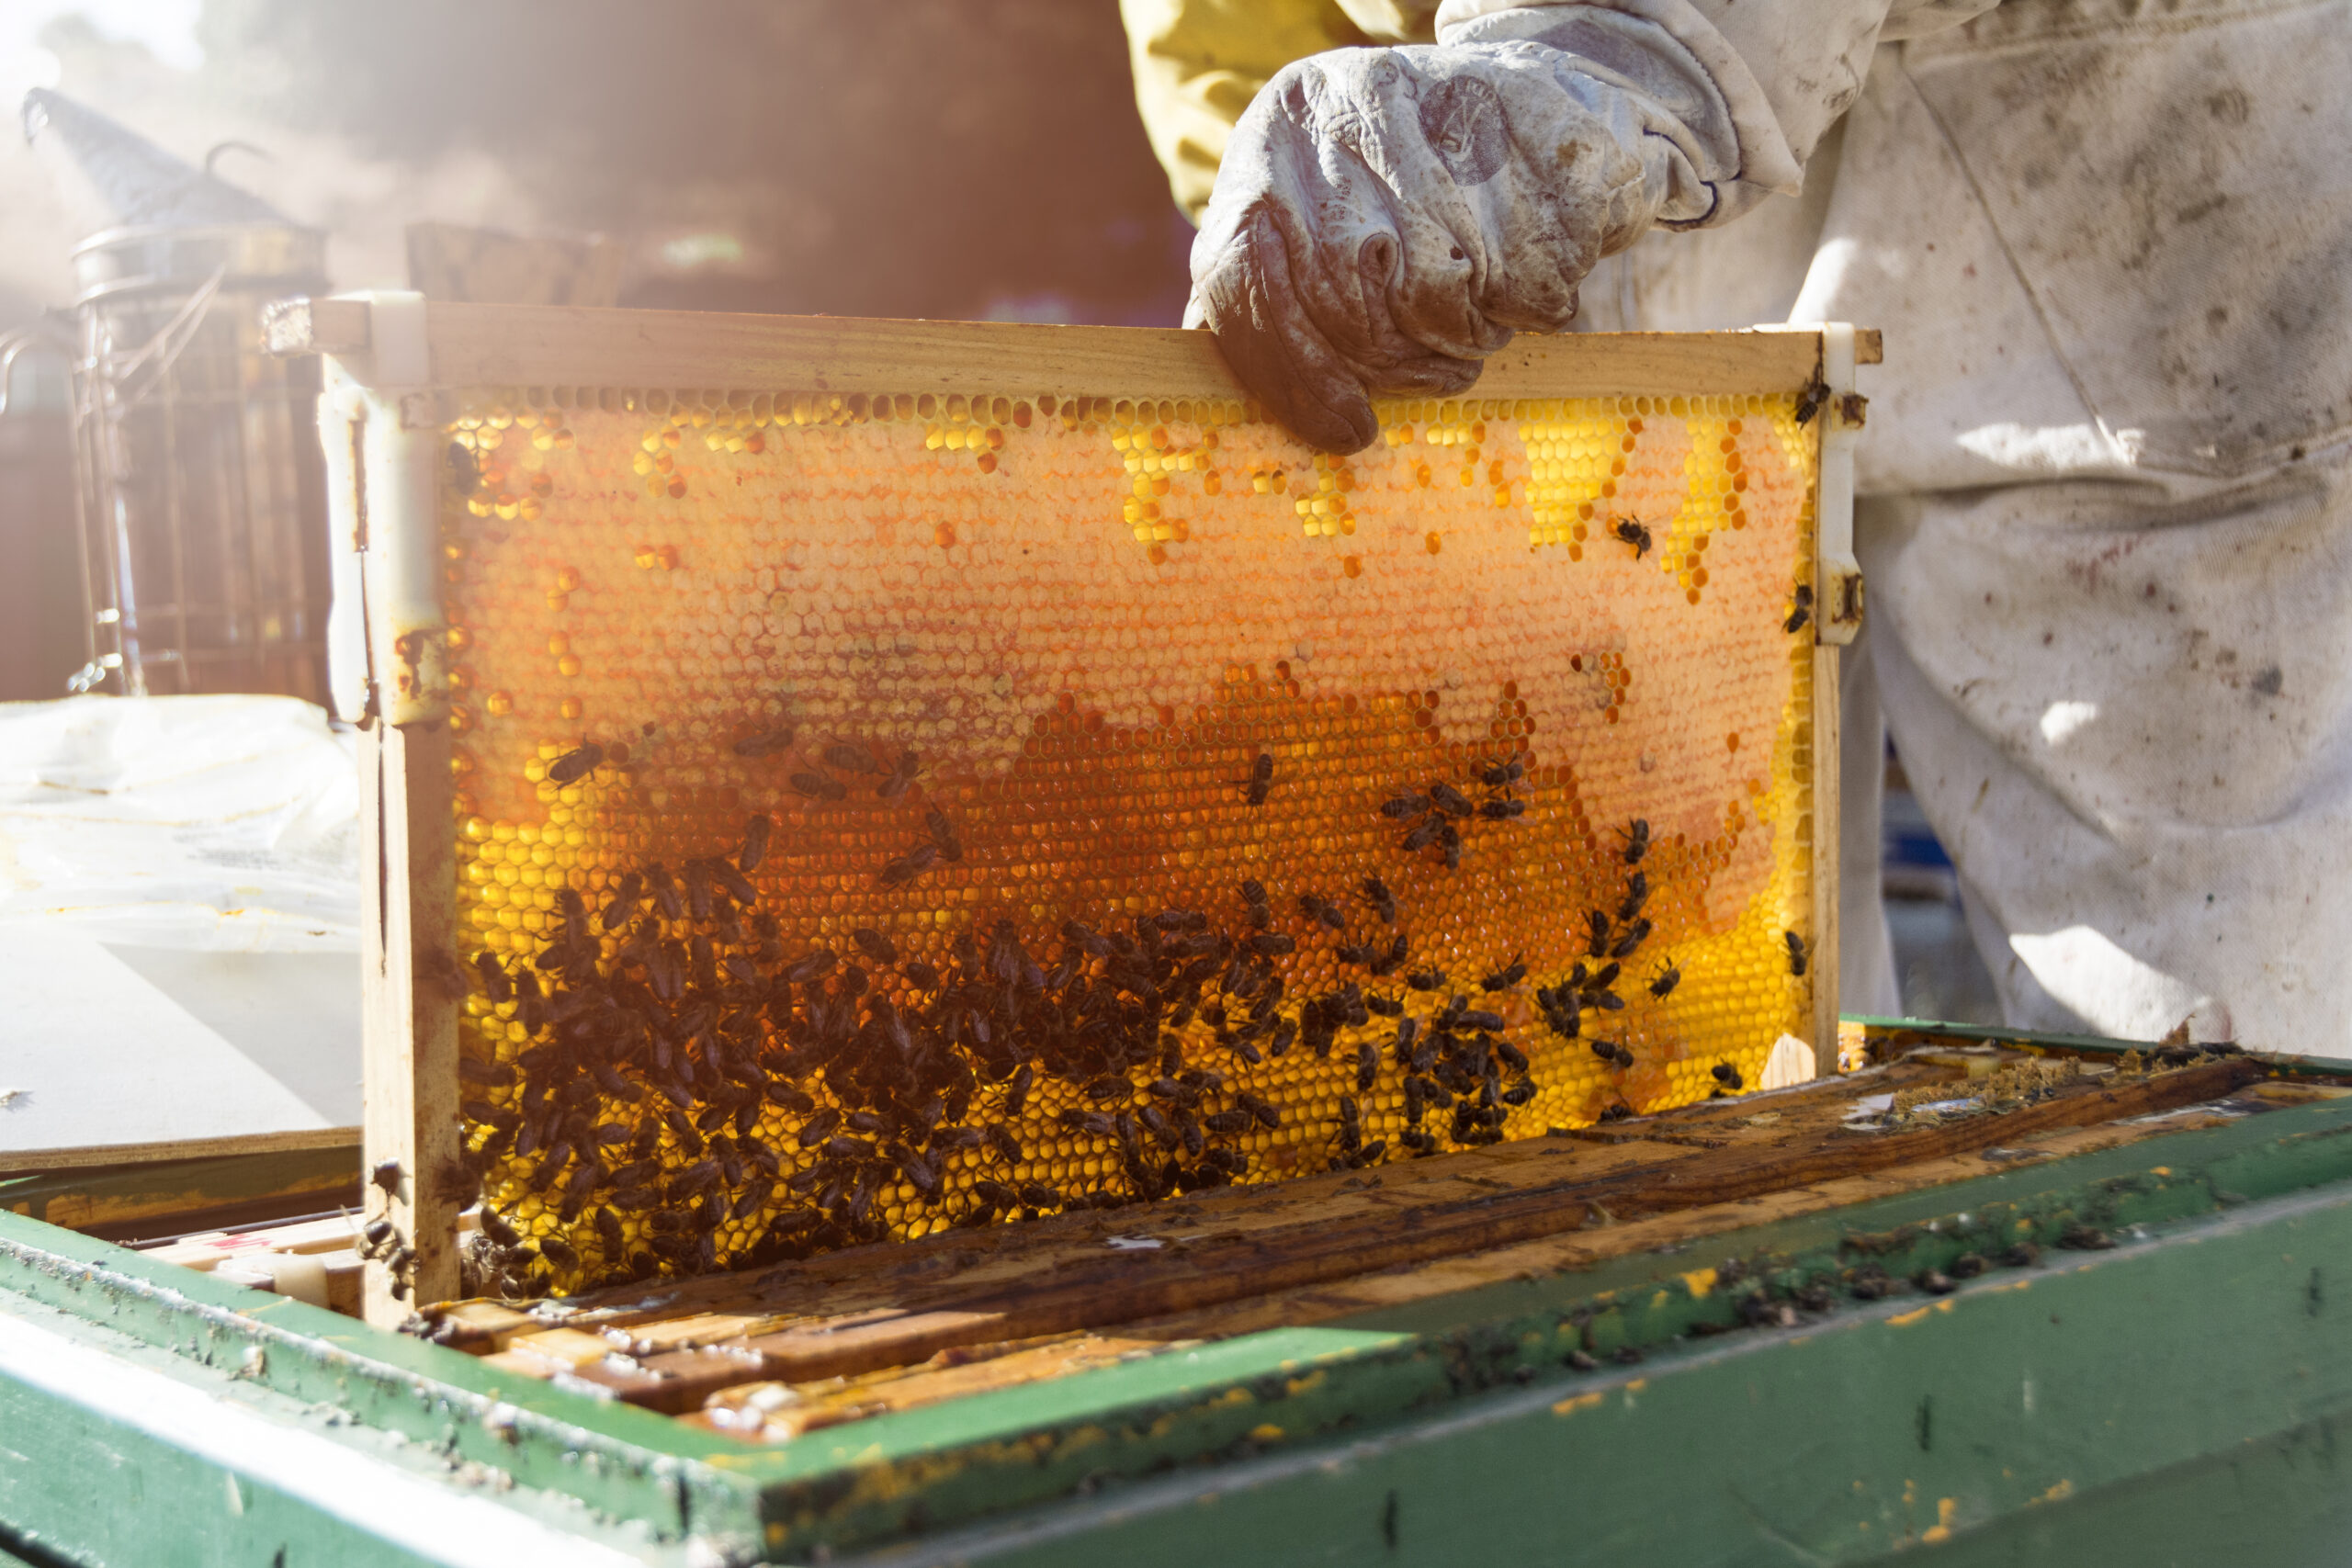 A Bee Keeper’s Tale: The Fascinating Process of Honey Extraction